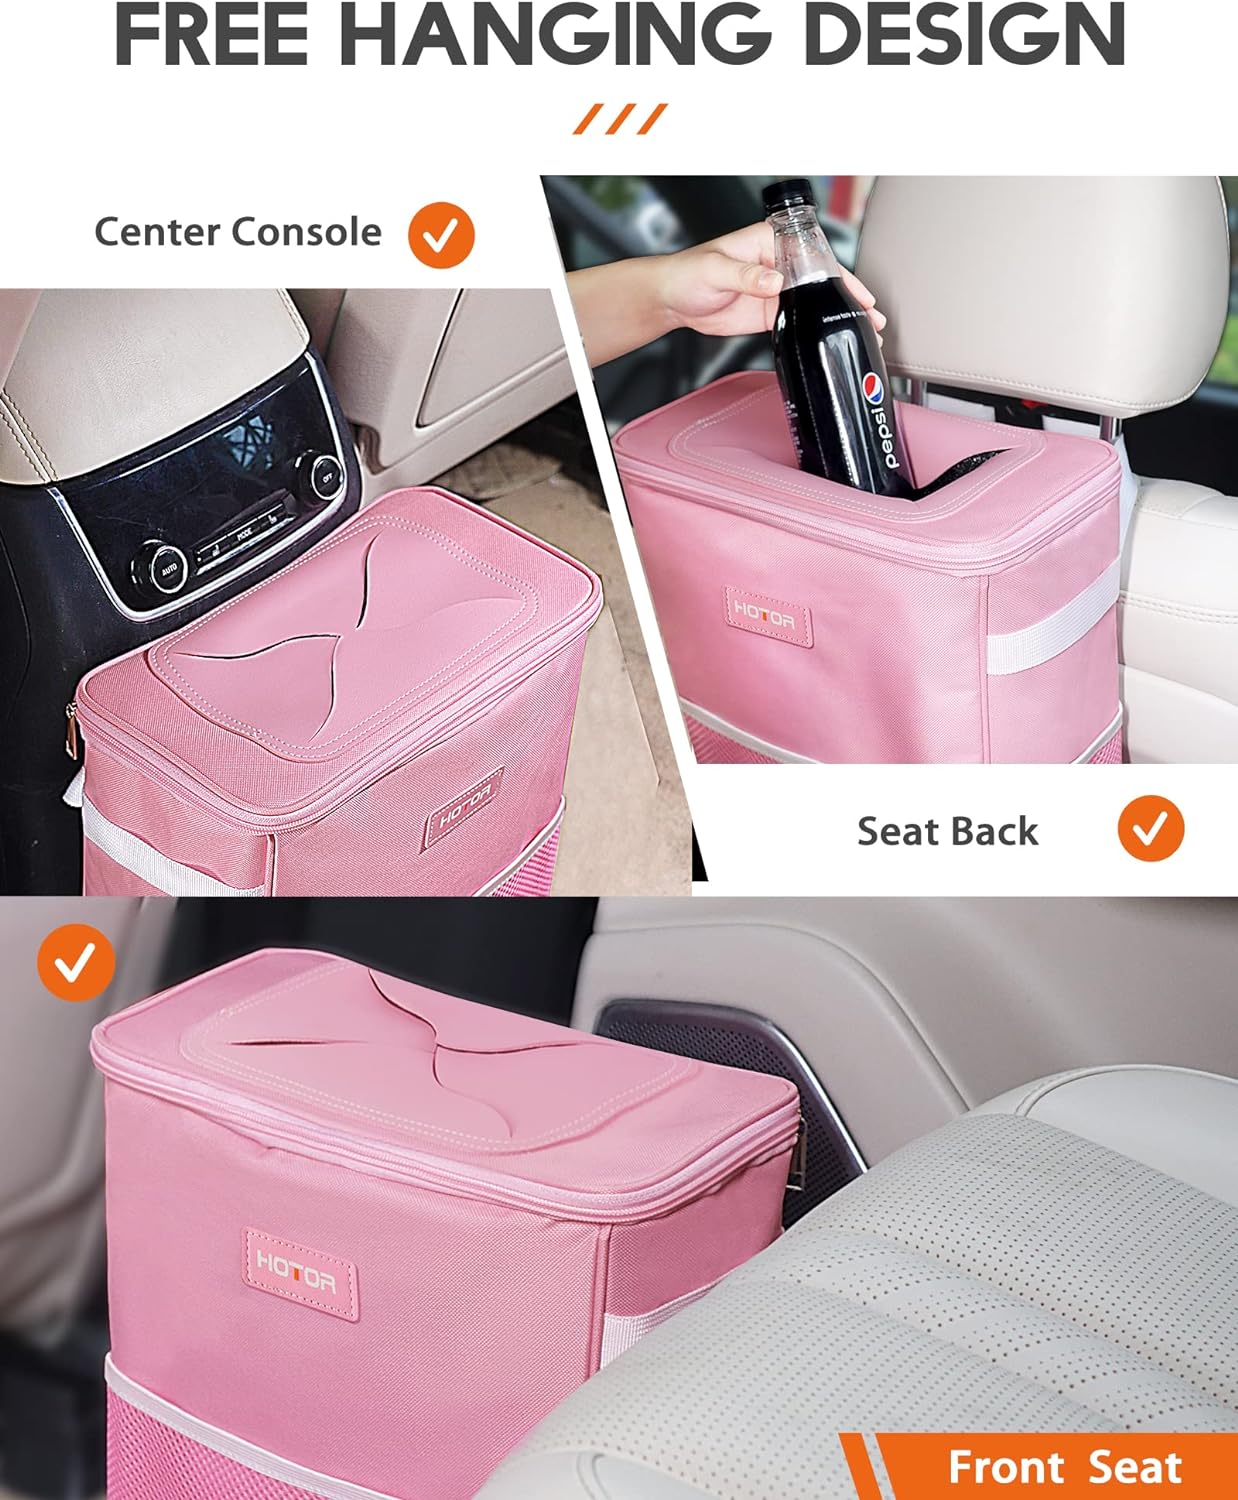 HOTOR Car Trash Can, 3-Gallon Ultra-Large Car Garbage Can, 100% Leakproof & Waterproof Trash Can for Car, Multipurpose Car Trash Bin with Adjustable Straps, Magnetic Buckles, Mesh Pockets (Pink)